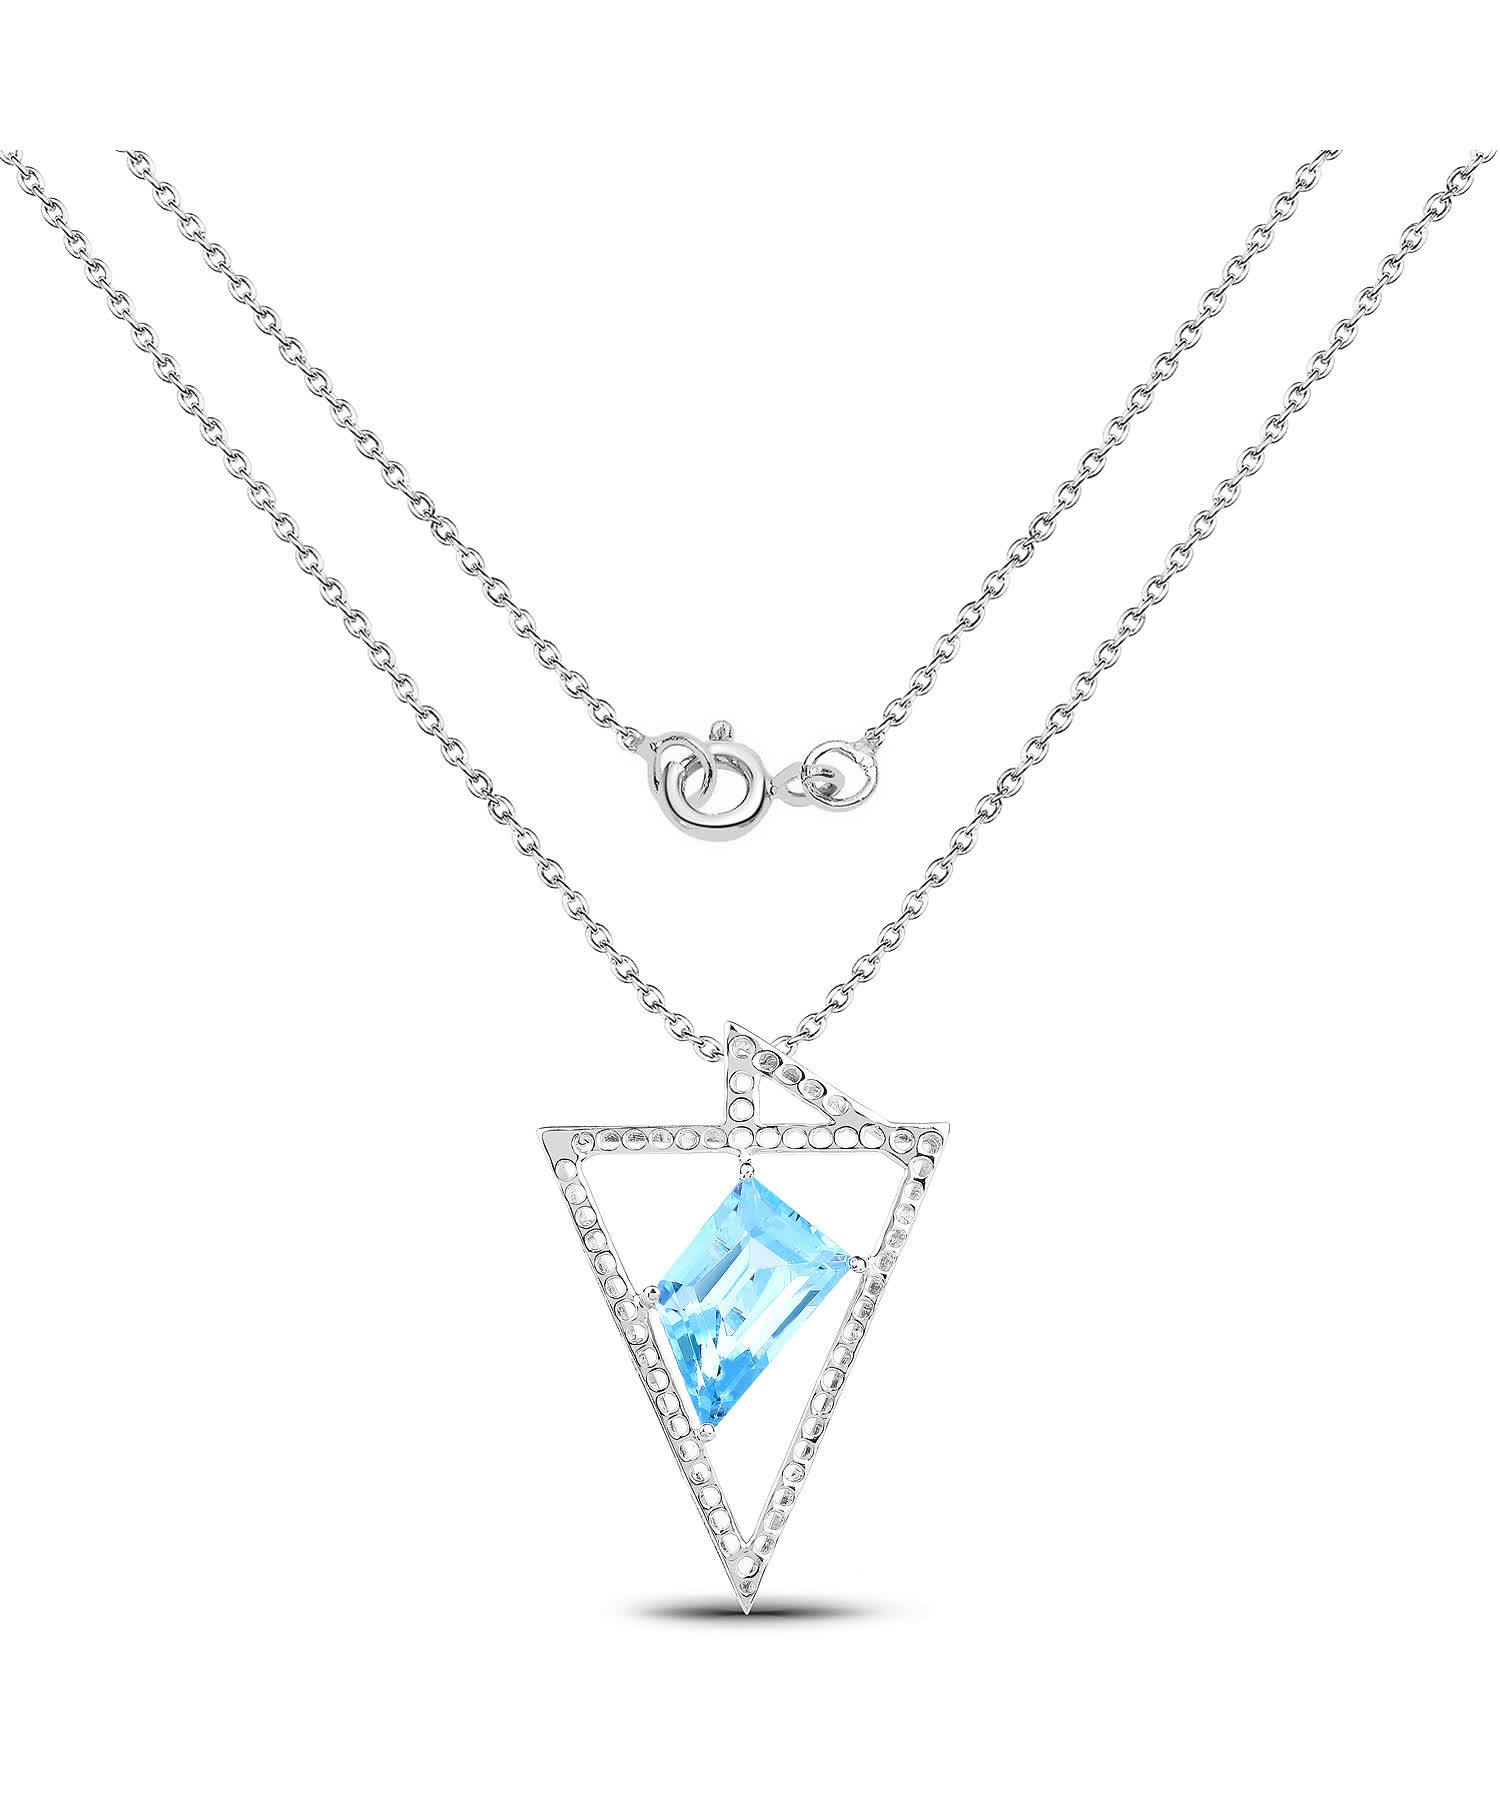 5.00ctw Natural Swiss Blue Topaz Rhodium Plated 925 Sterling Silver Modern Pendant With Chain View 2